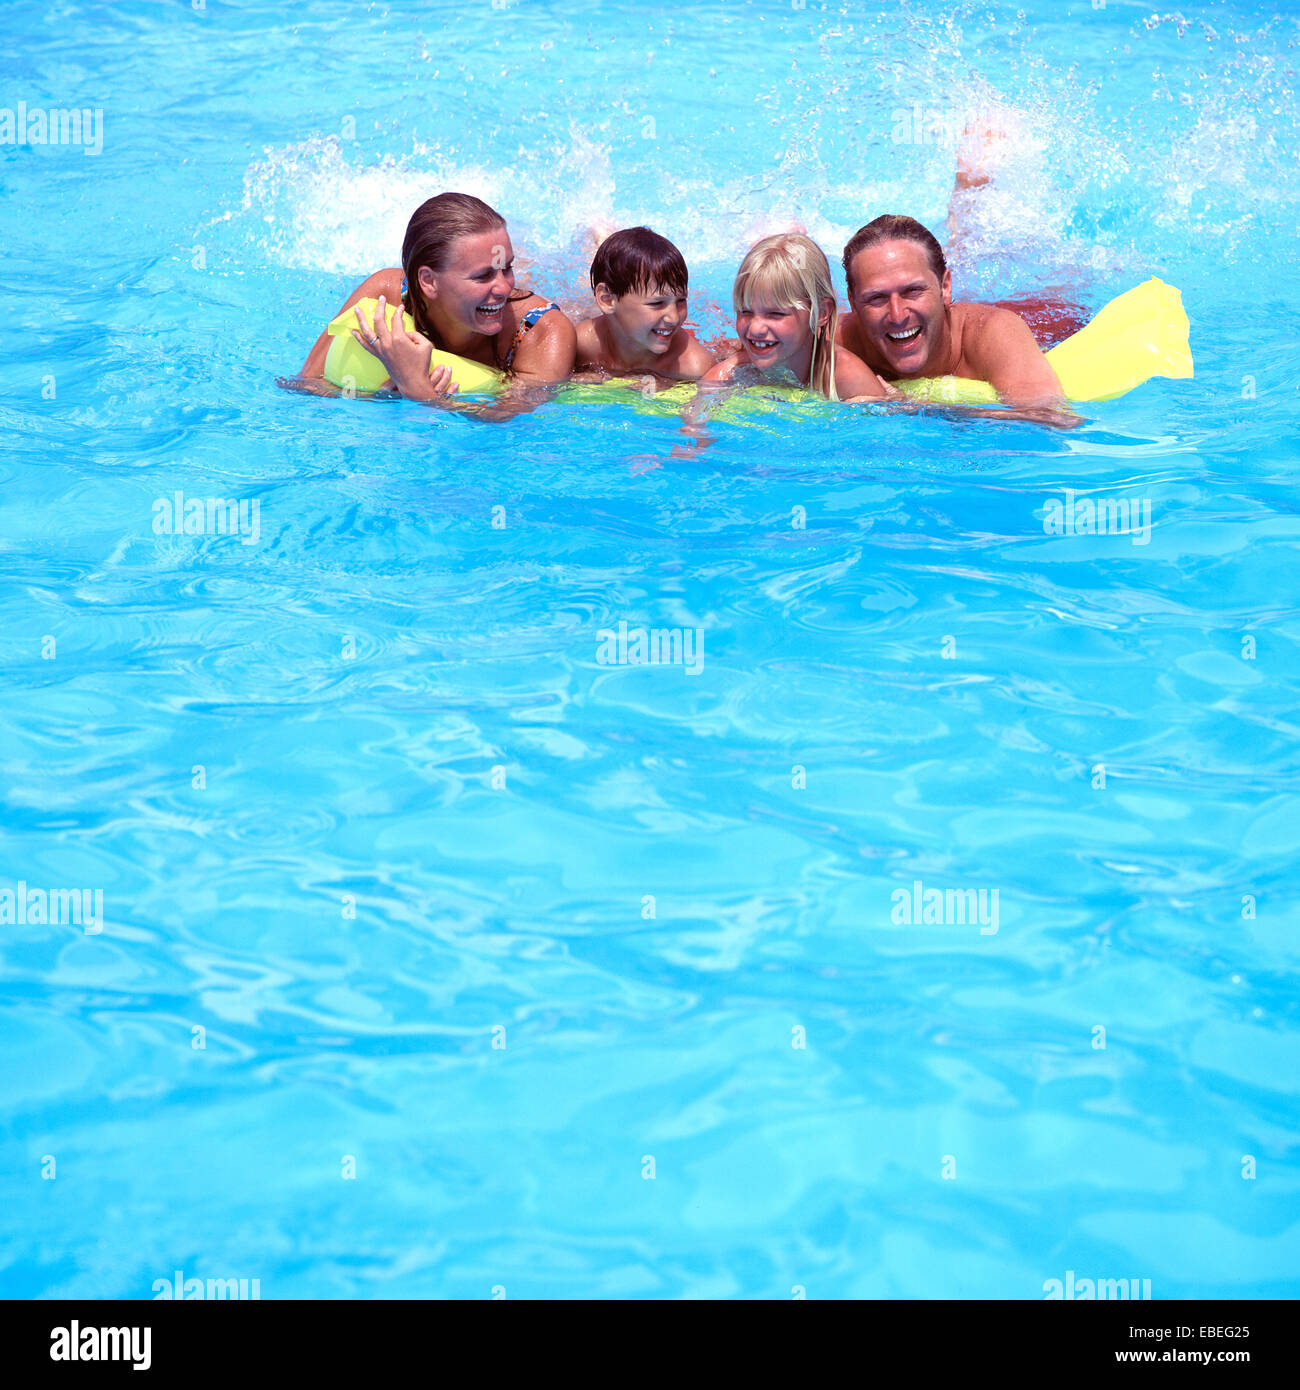 FAMILY ON LILO IN POOL Stock Photo